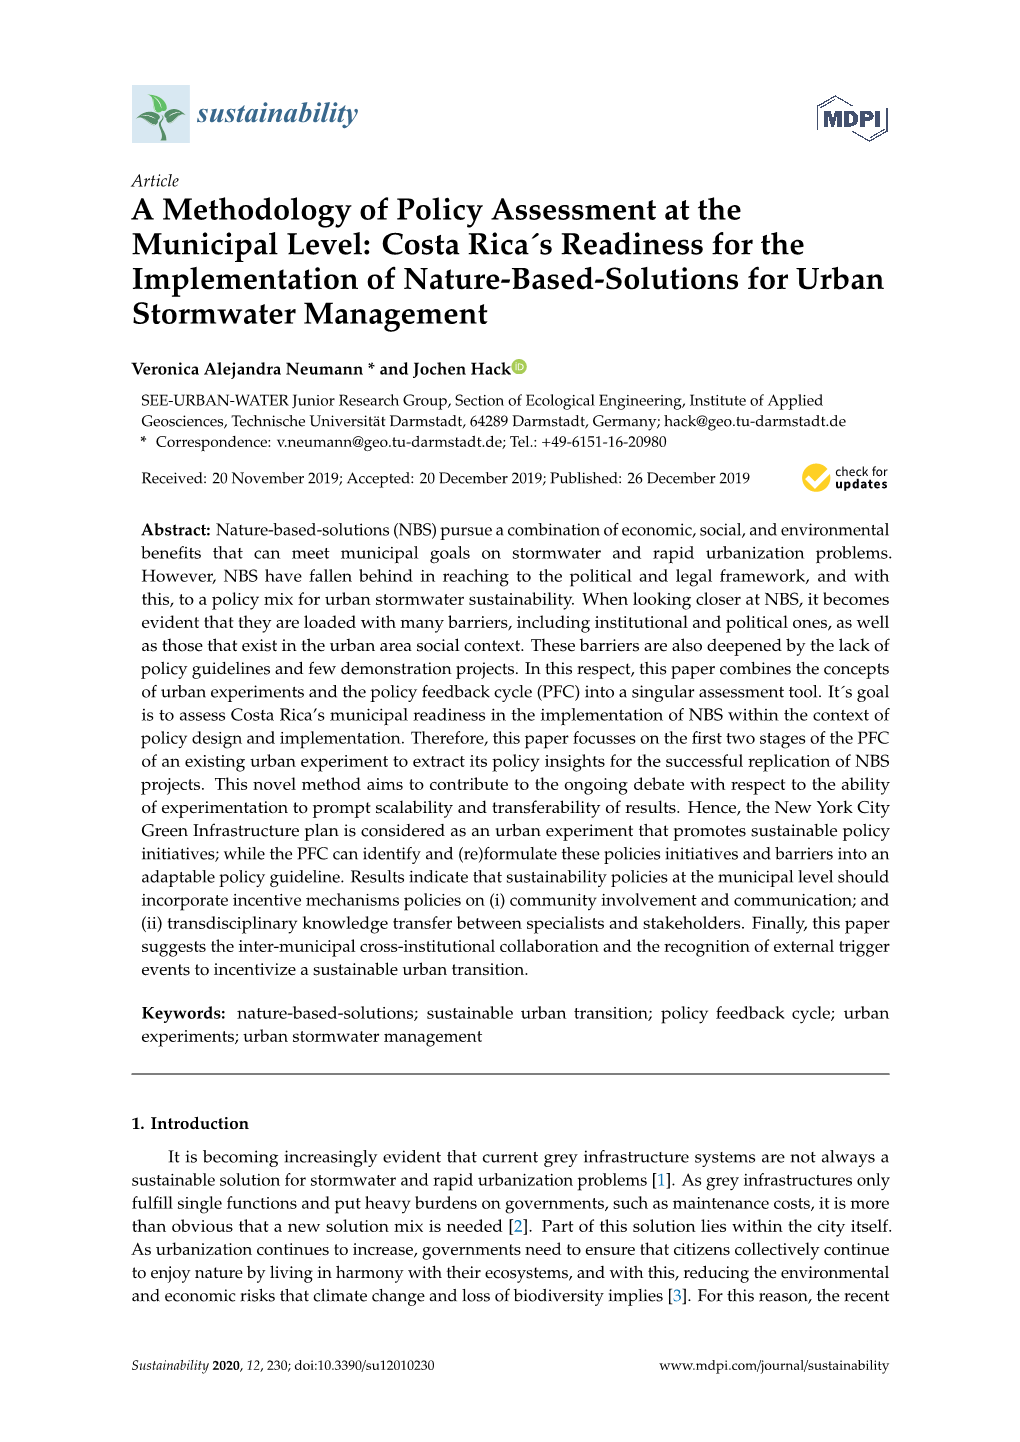 A Methodology of Policy Assessment at the Municipal Level: Costa Rica´S Readiness for the Implementation of Nature-Based-Solutions for Urban Stormwater Management